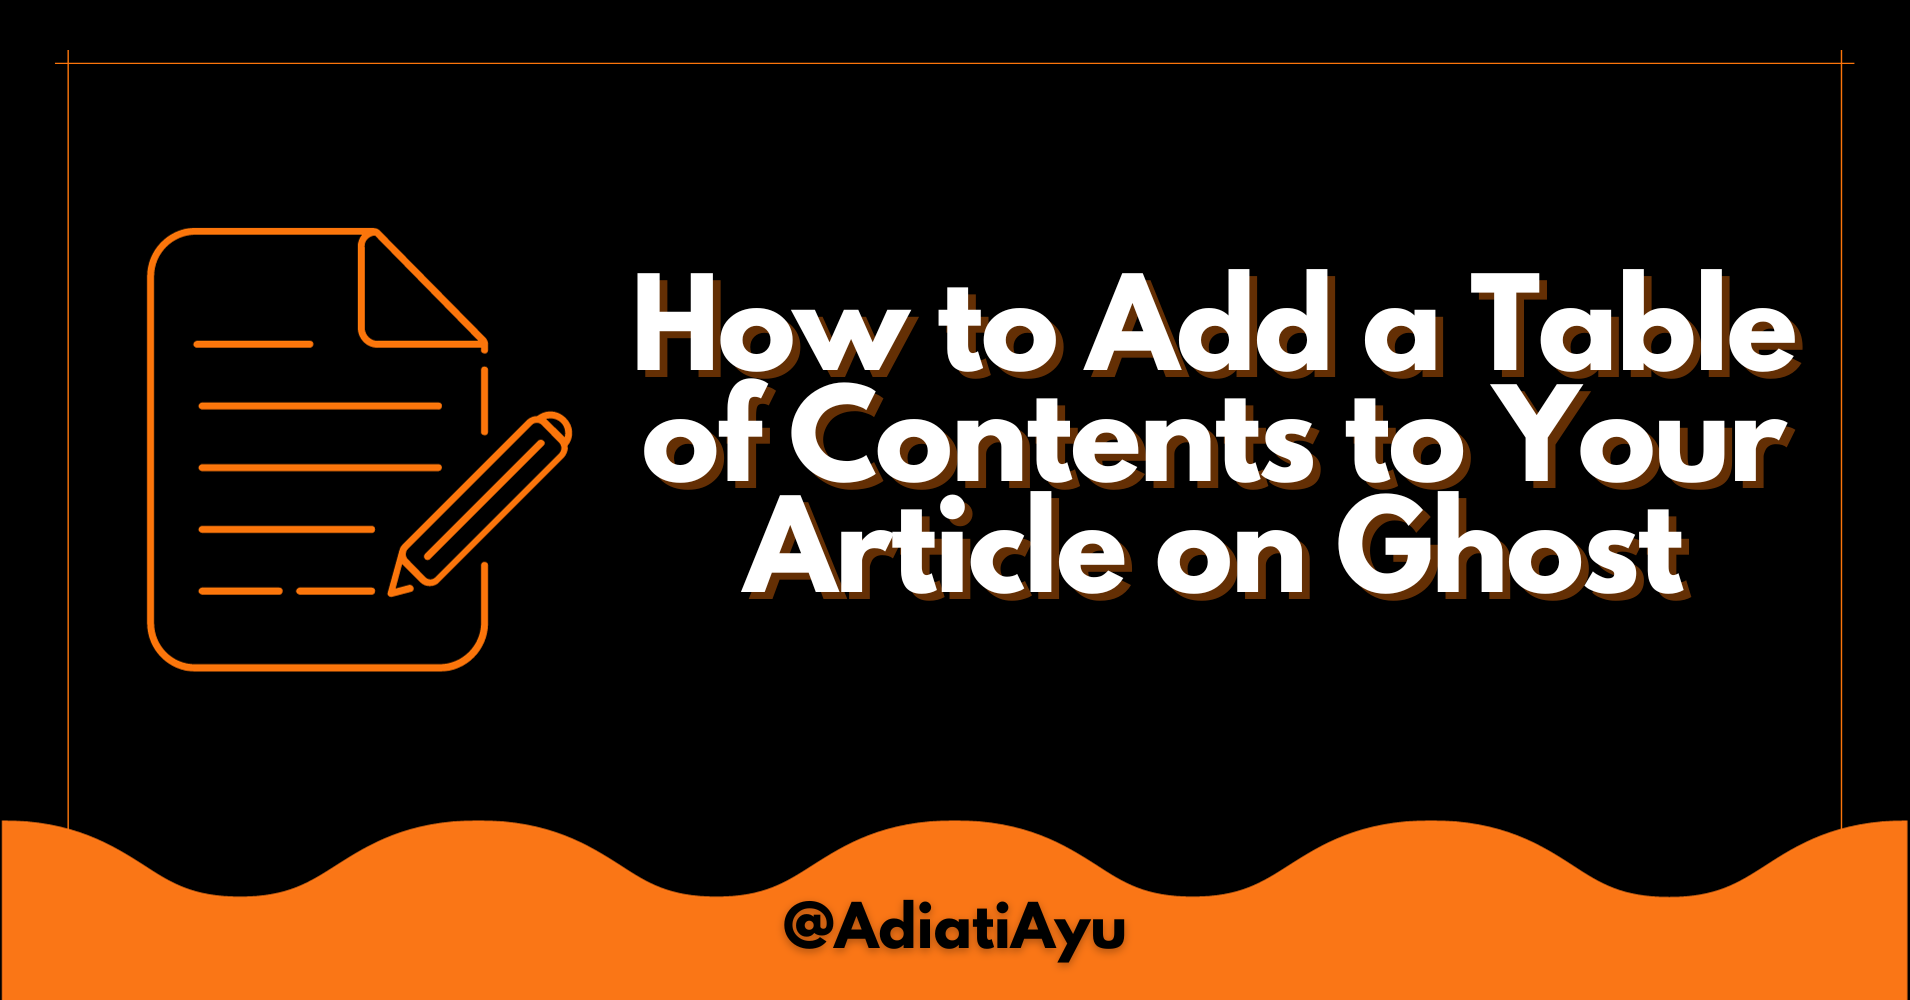 Image for How to Add a Table of Contents to Your Article on Ghost